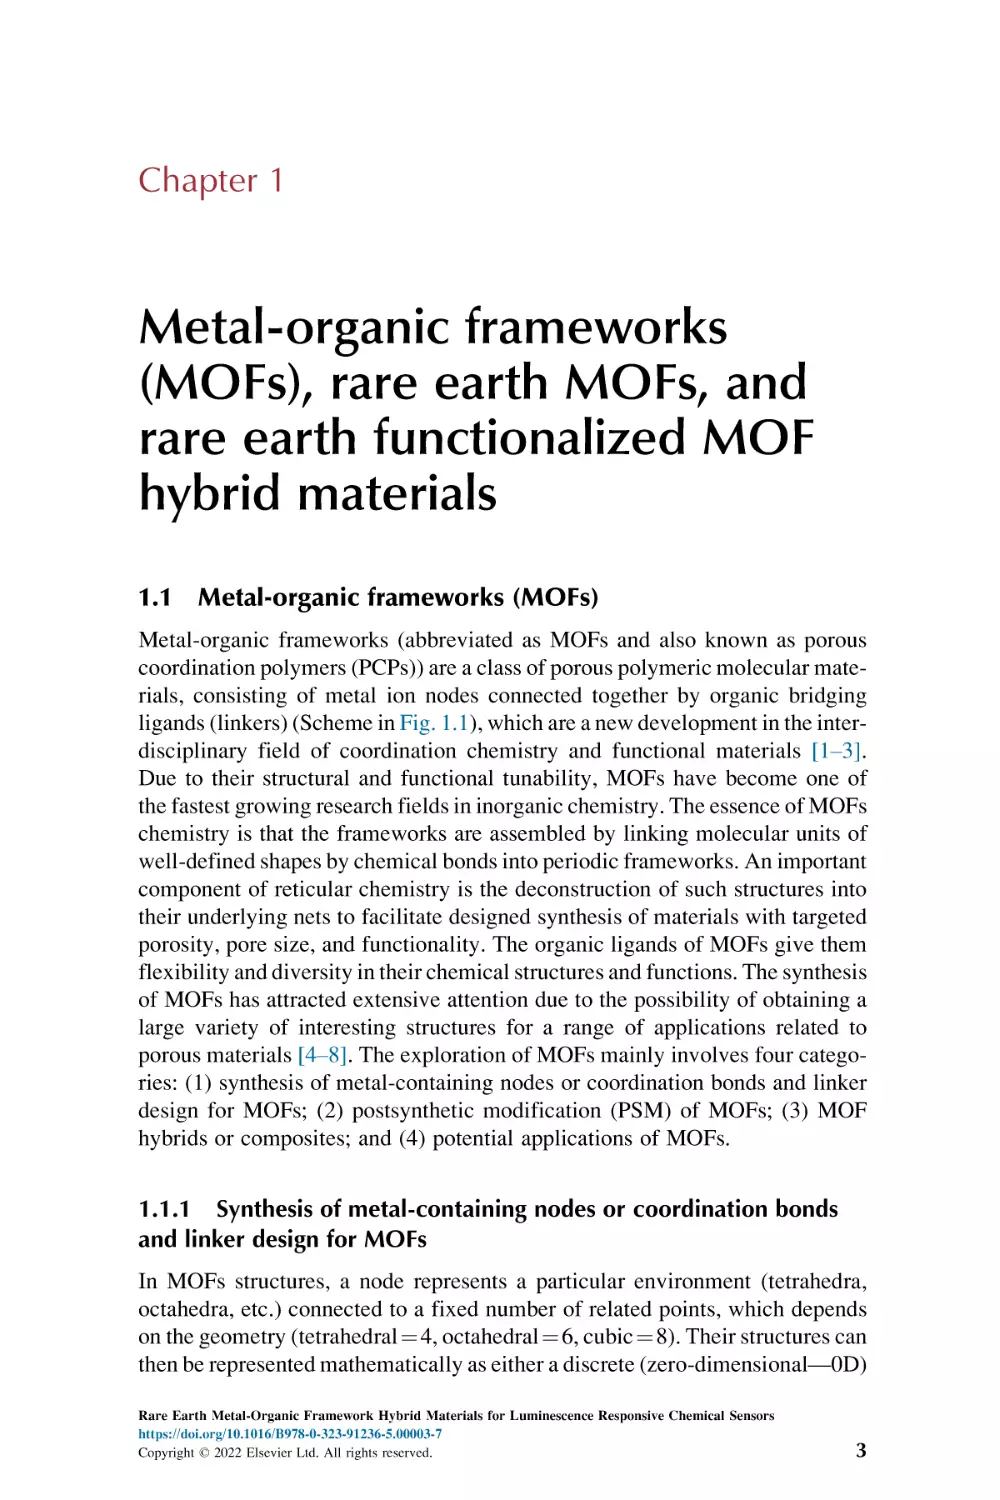 Chapter 1
1.1. Metal-organic frameworks (MOFs)
1.1.1. Synthesis of metal-containing nodes or coordination bonds and linker design for MOFs